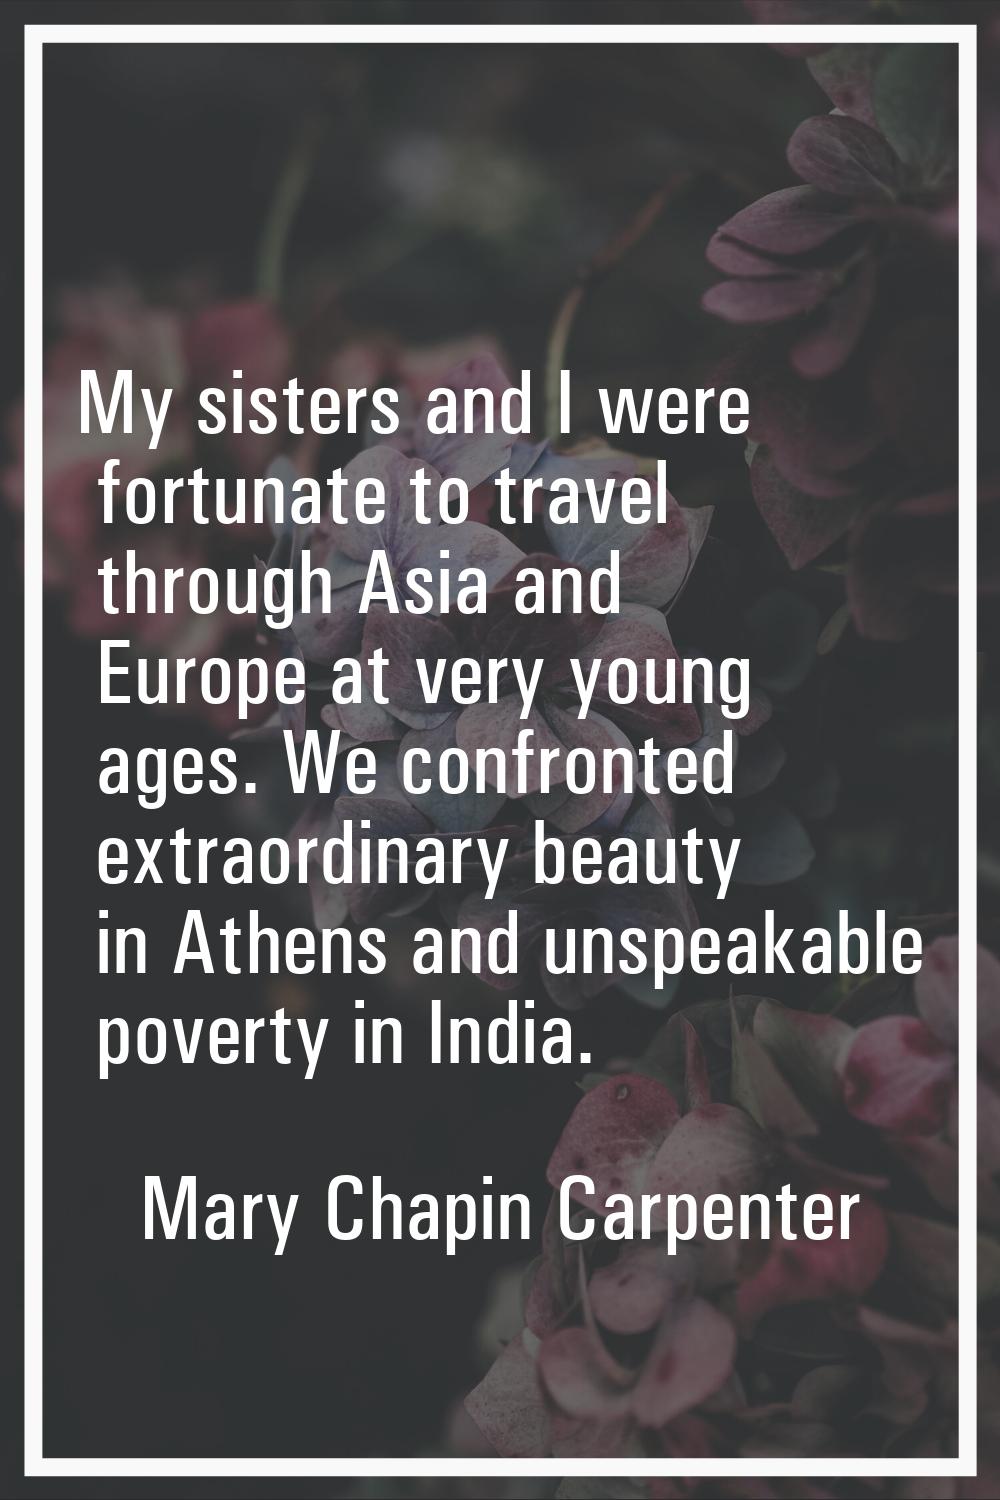 My sisters and I were fortunate to travel through Asia and Europe at very young ages. We confronted